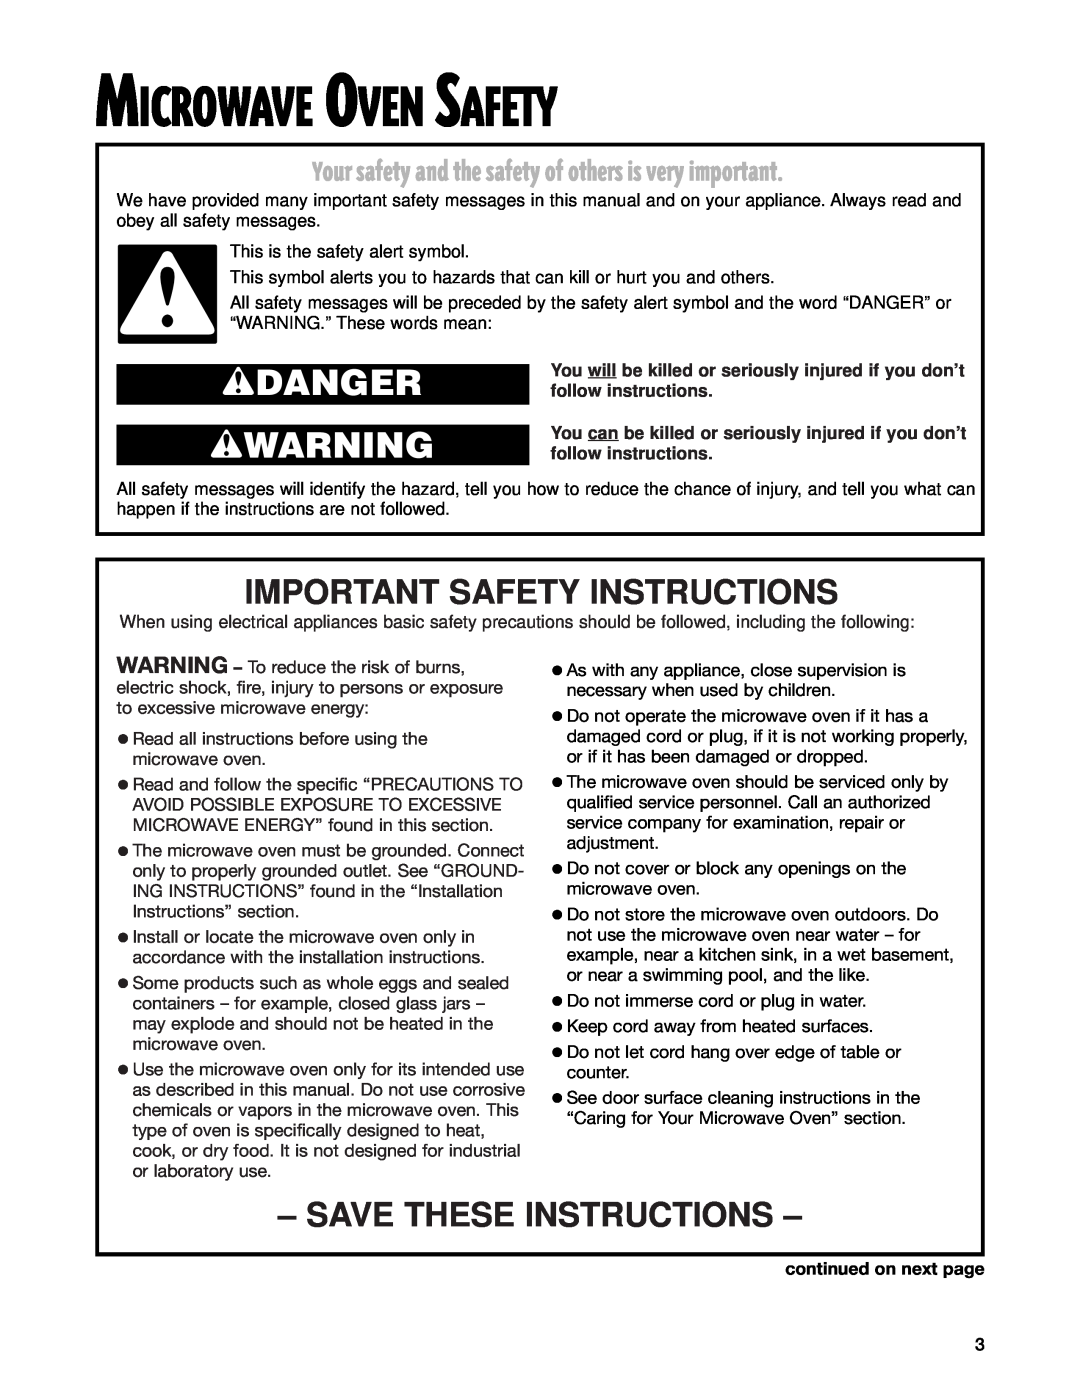 Whirlpool MT1071SG Microwave Oven Safety, Important Safety Instructions, Save These Instructions, wDANGER wWARNING 